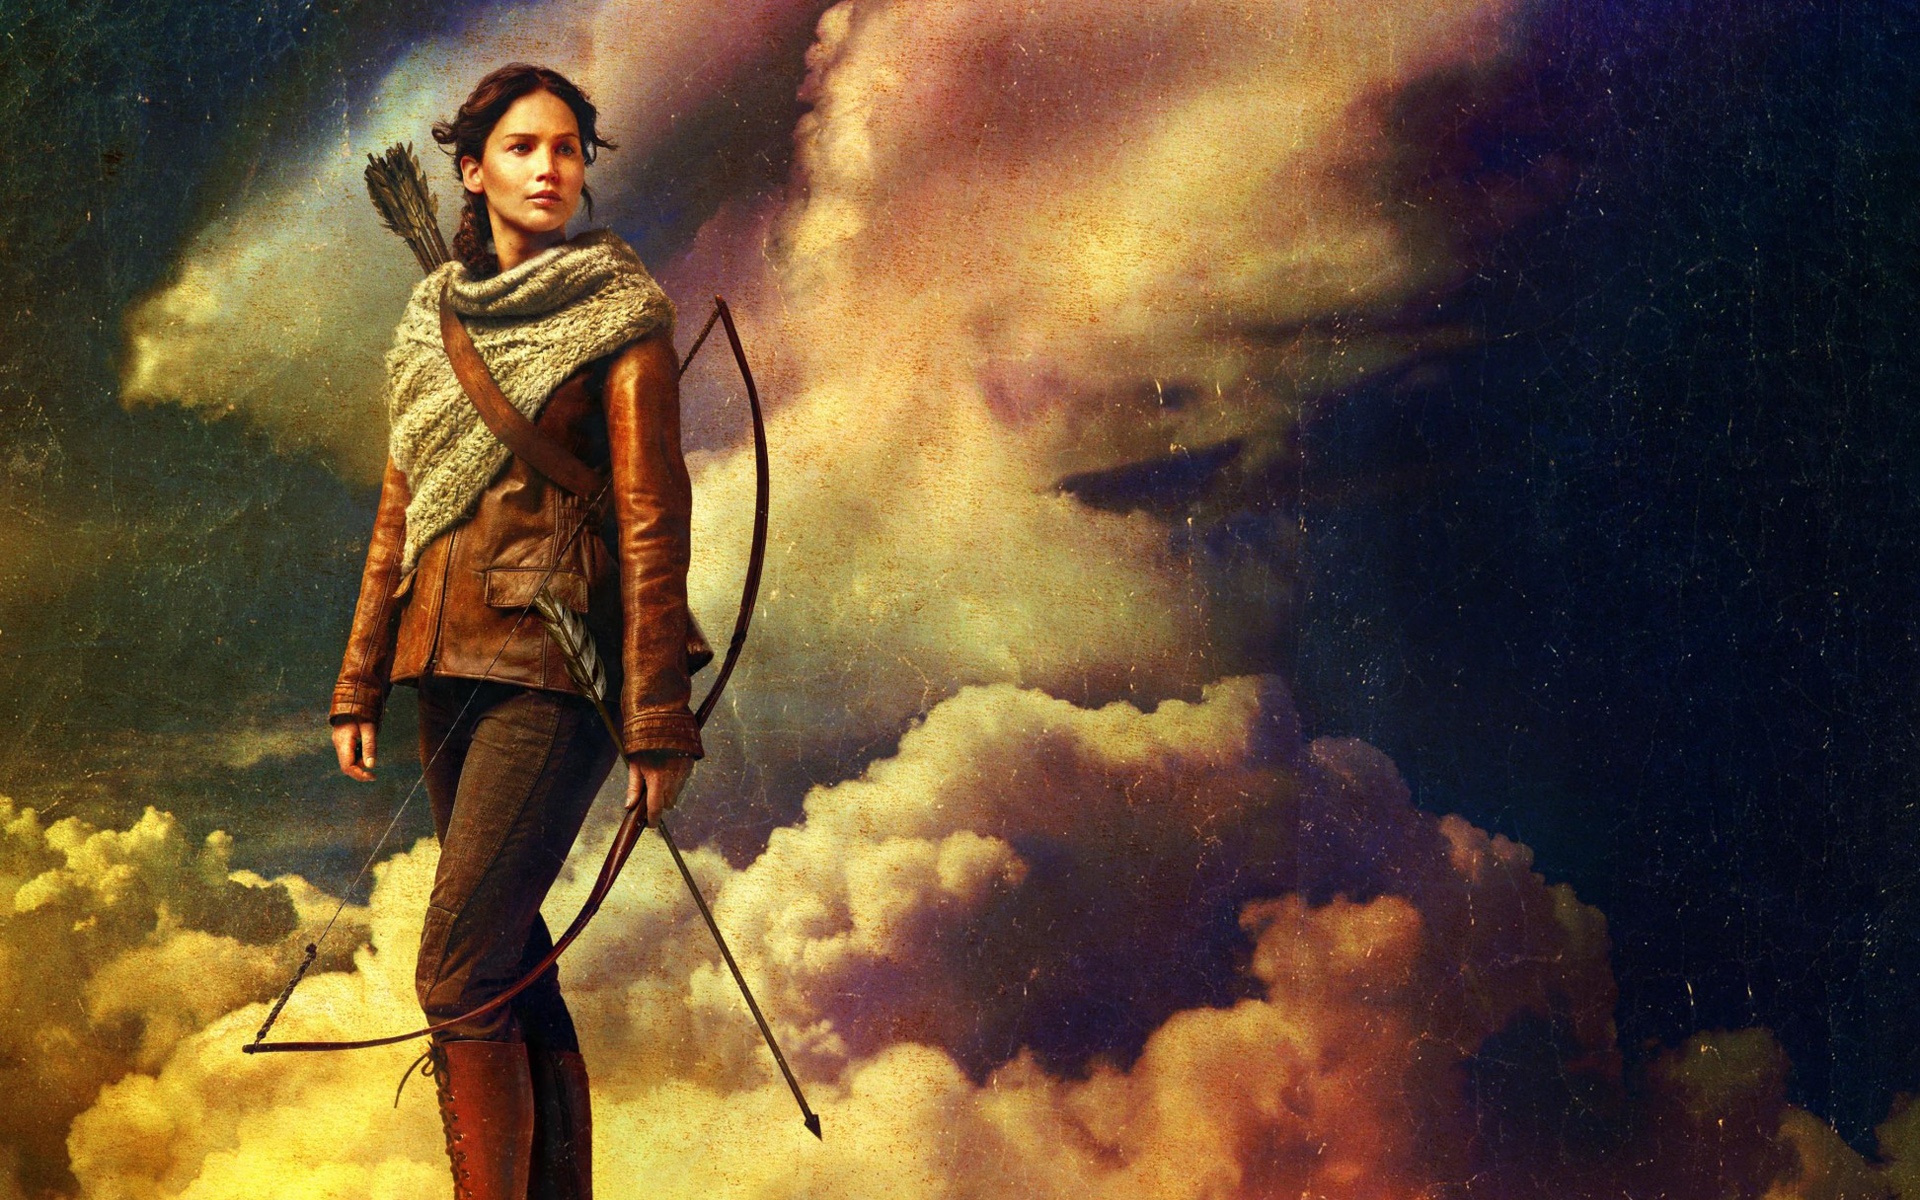 Crossbow The Hunger Games 1920x1200